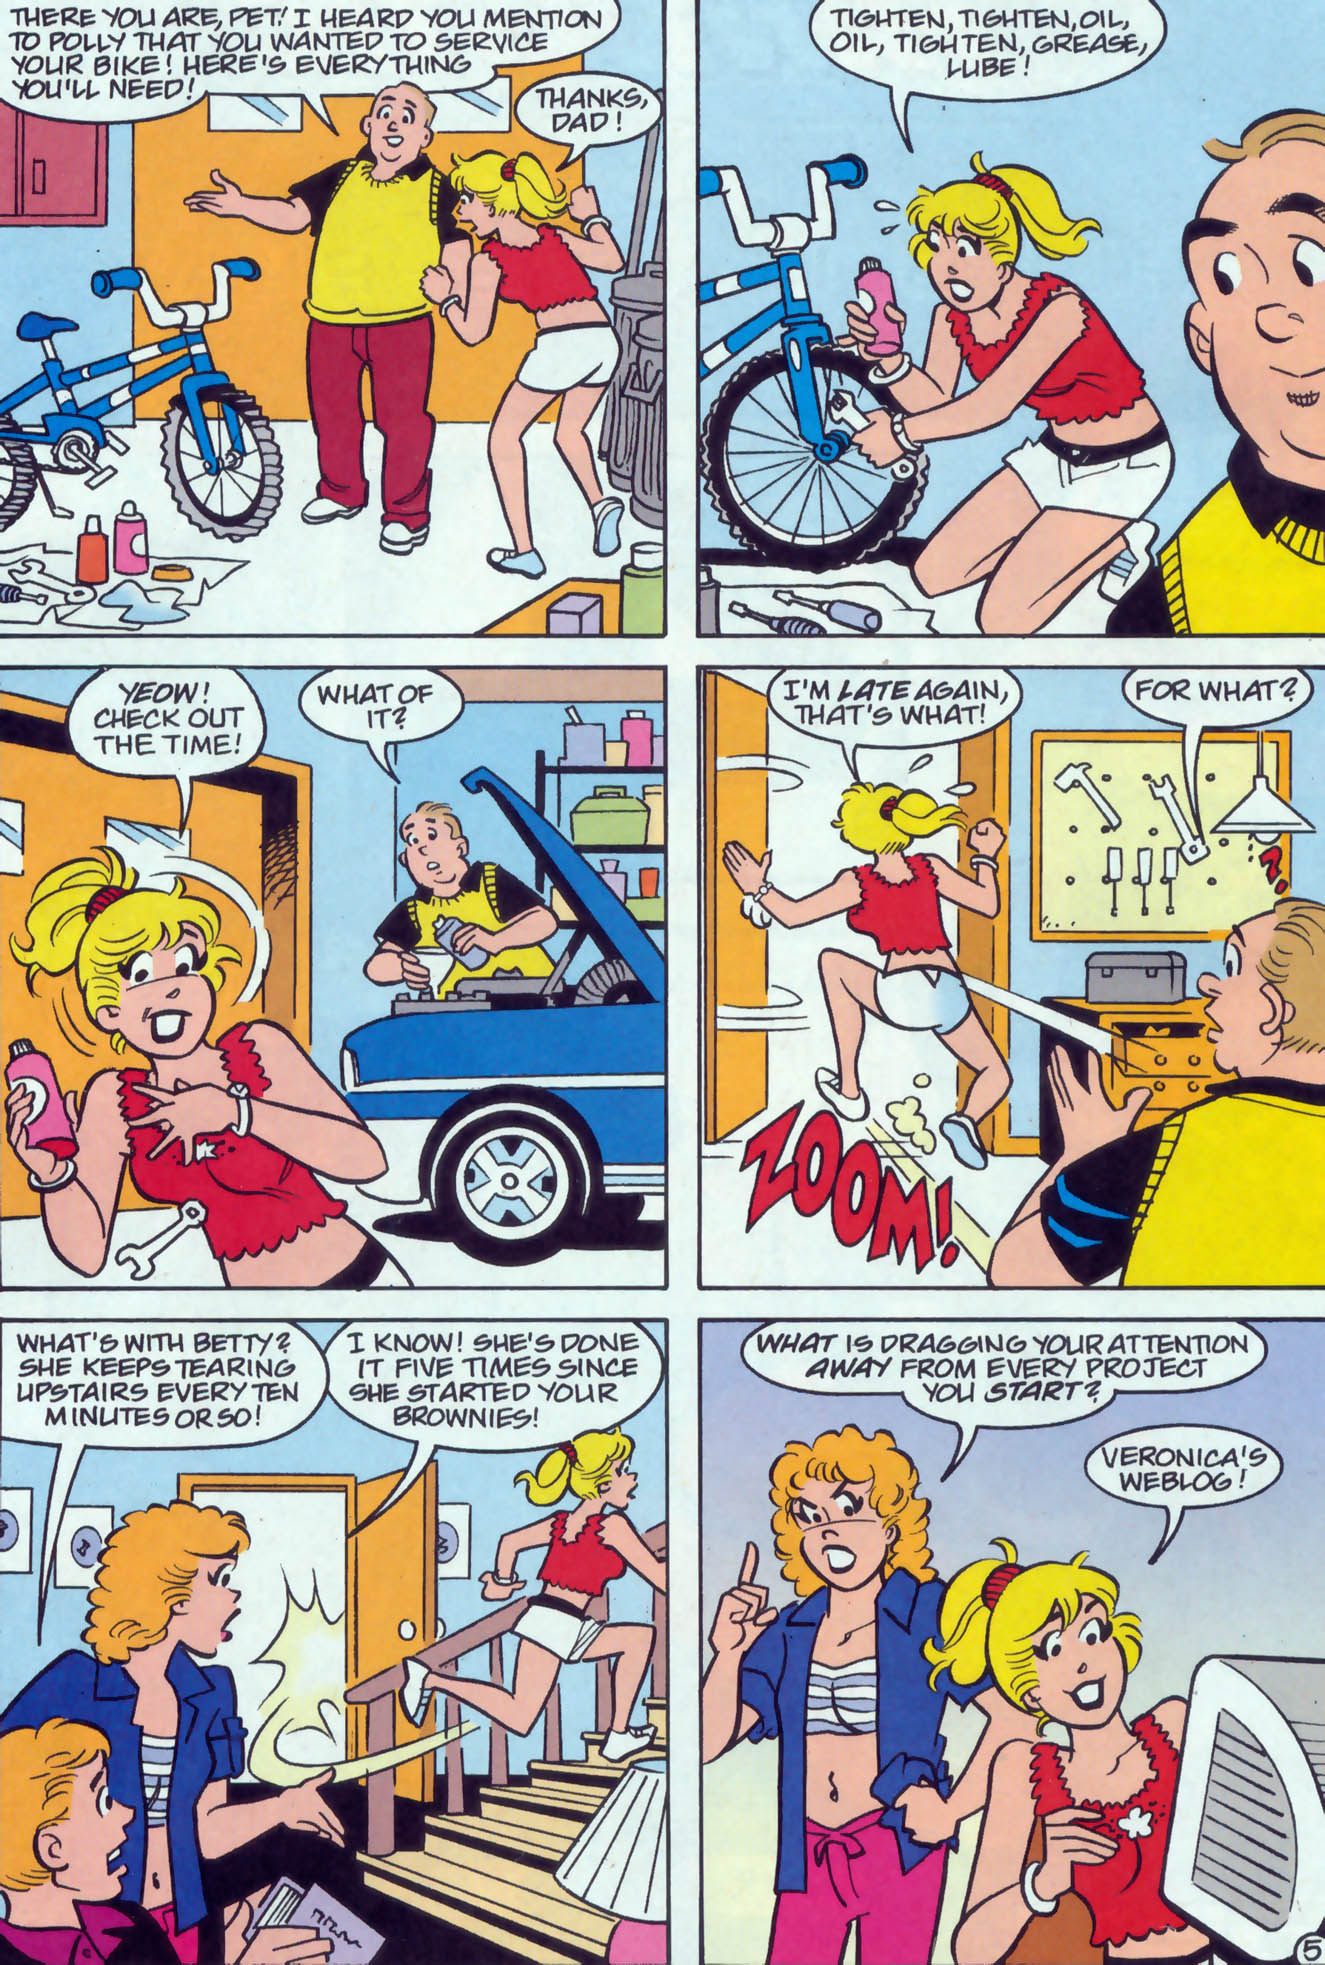 Read online Betty comic -  Issue #148 - 6